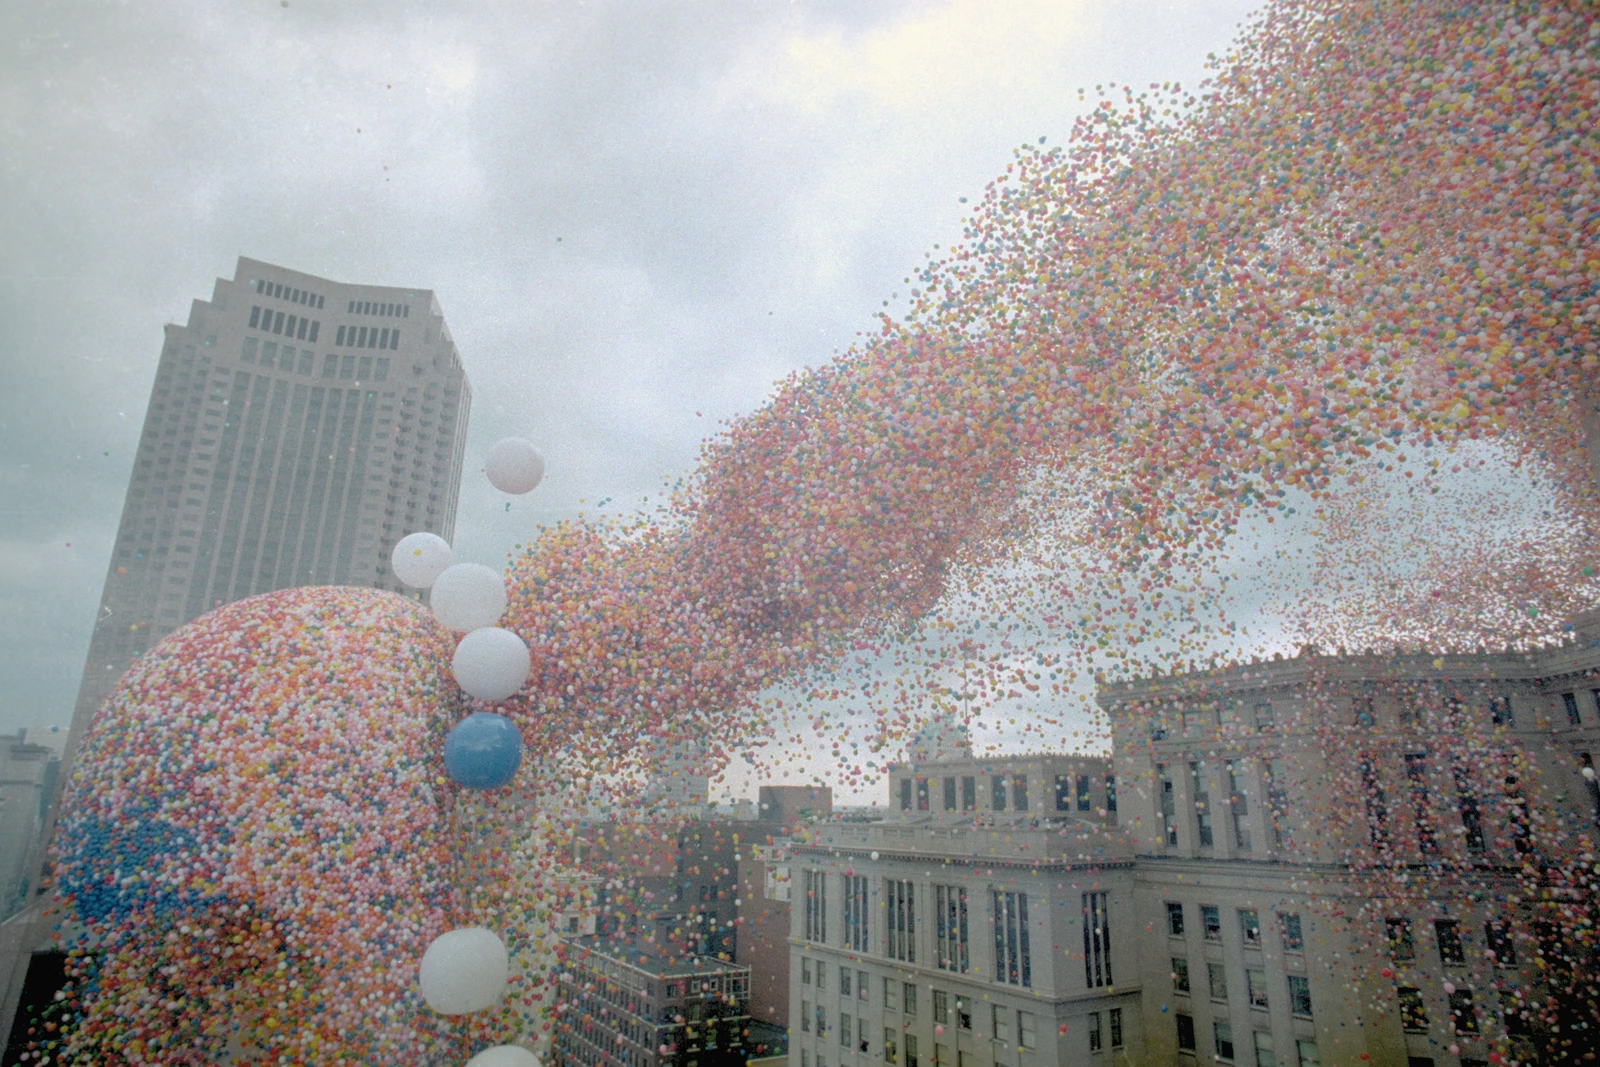 How Clevelands Balloonfest 86 Became a Public Disaster Porn Photo